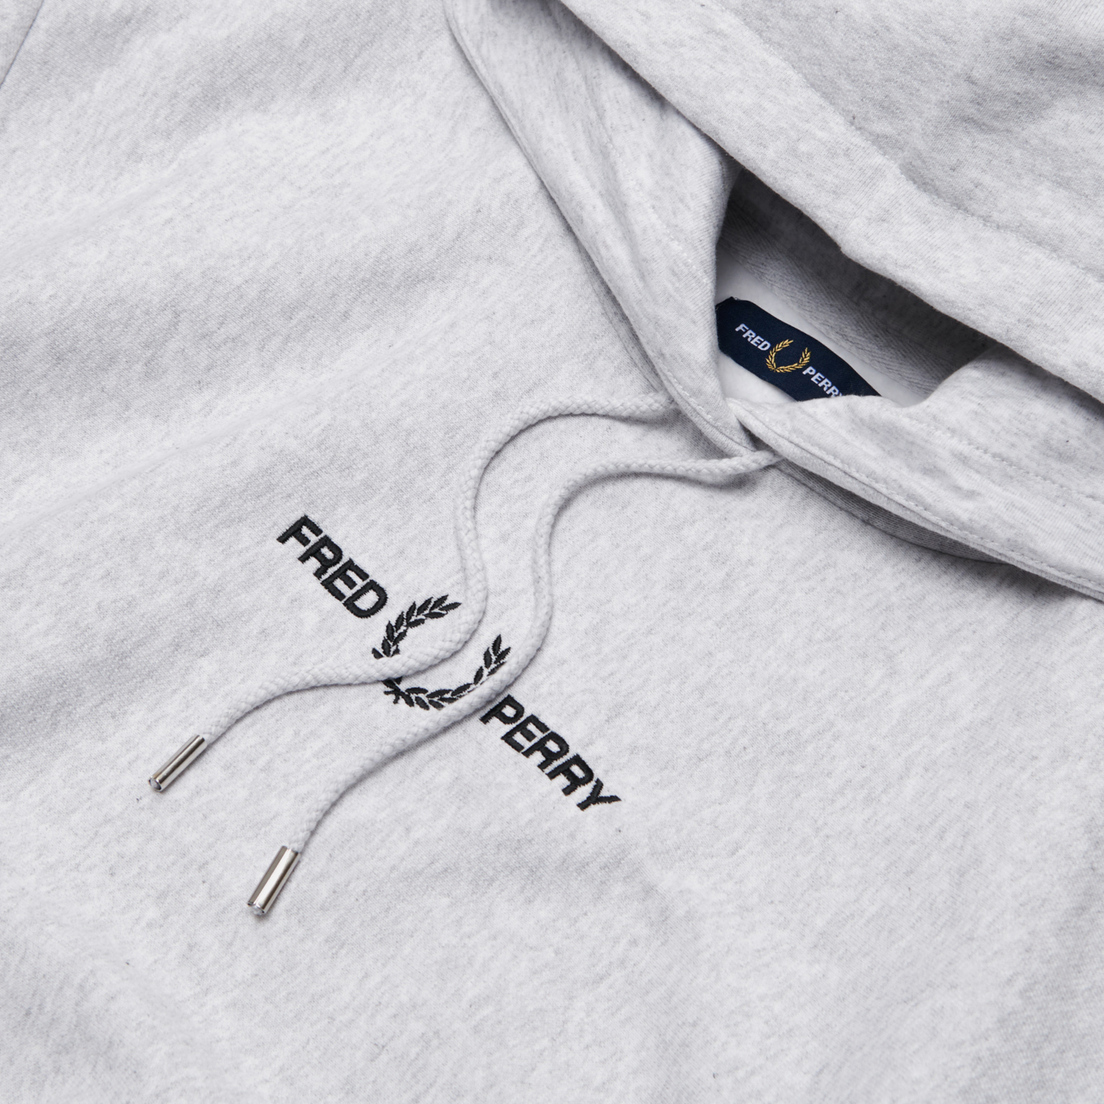 Fred Perry Женская толстовка Embroidered Hoodie